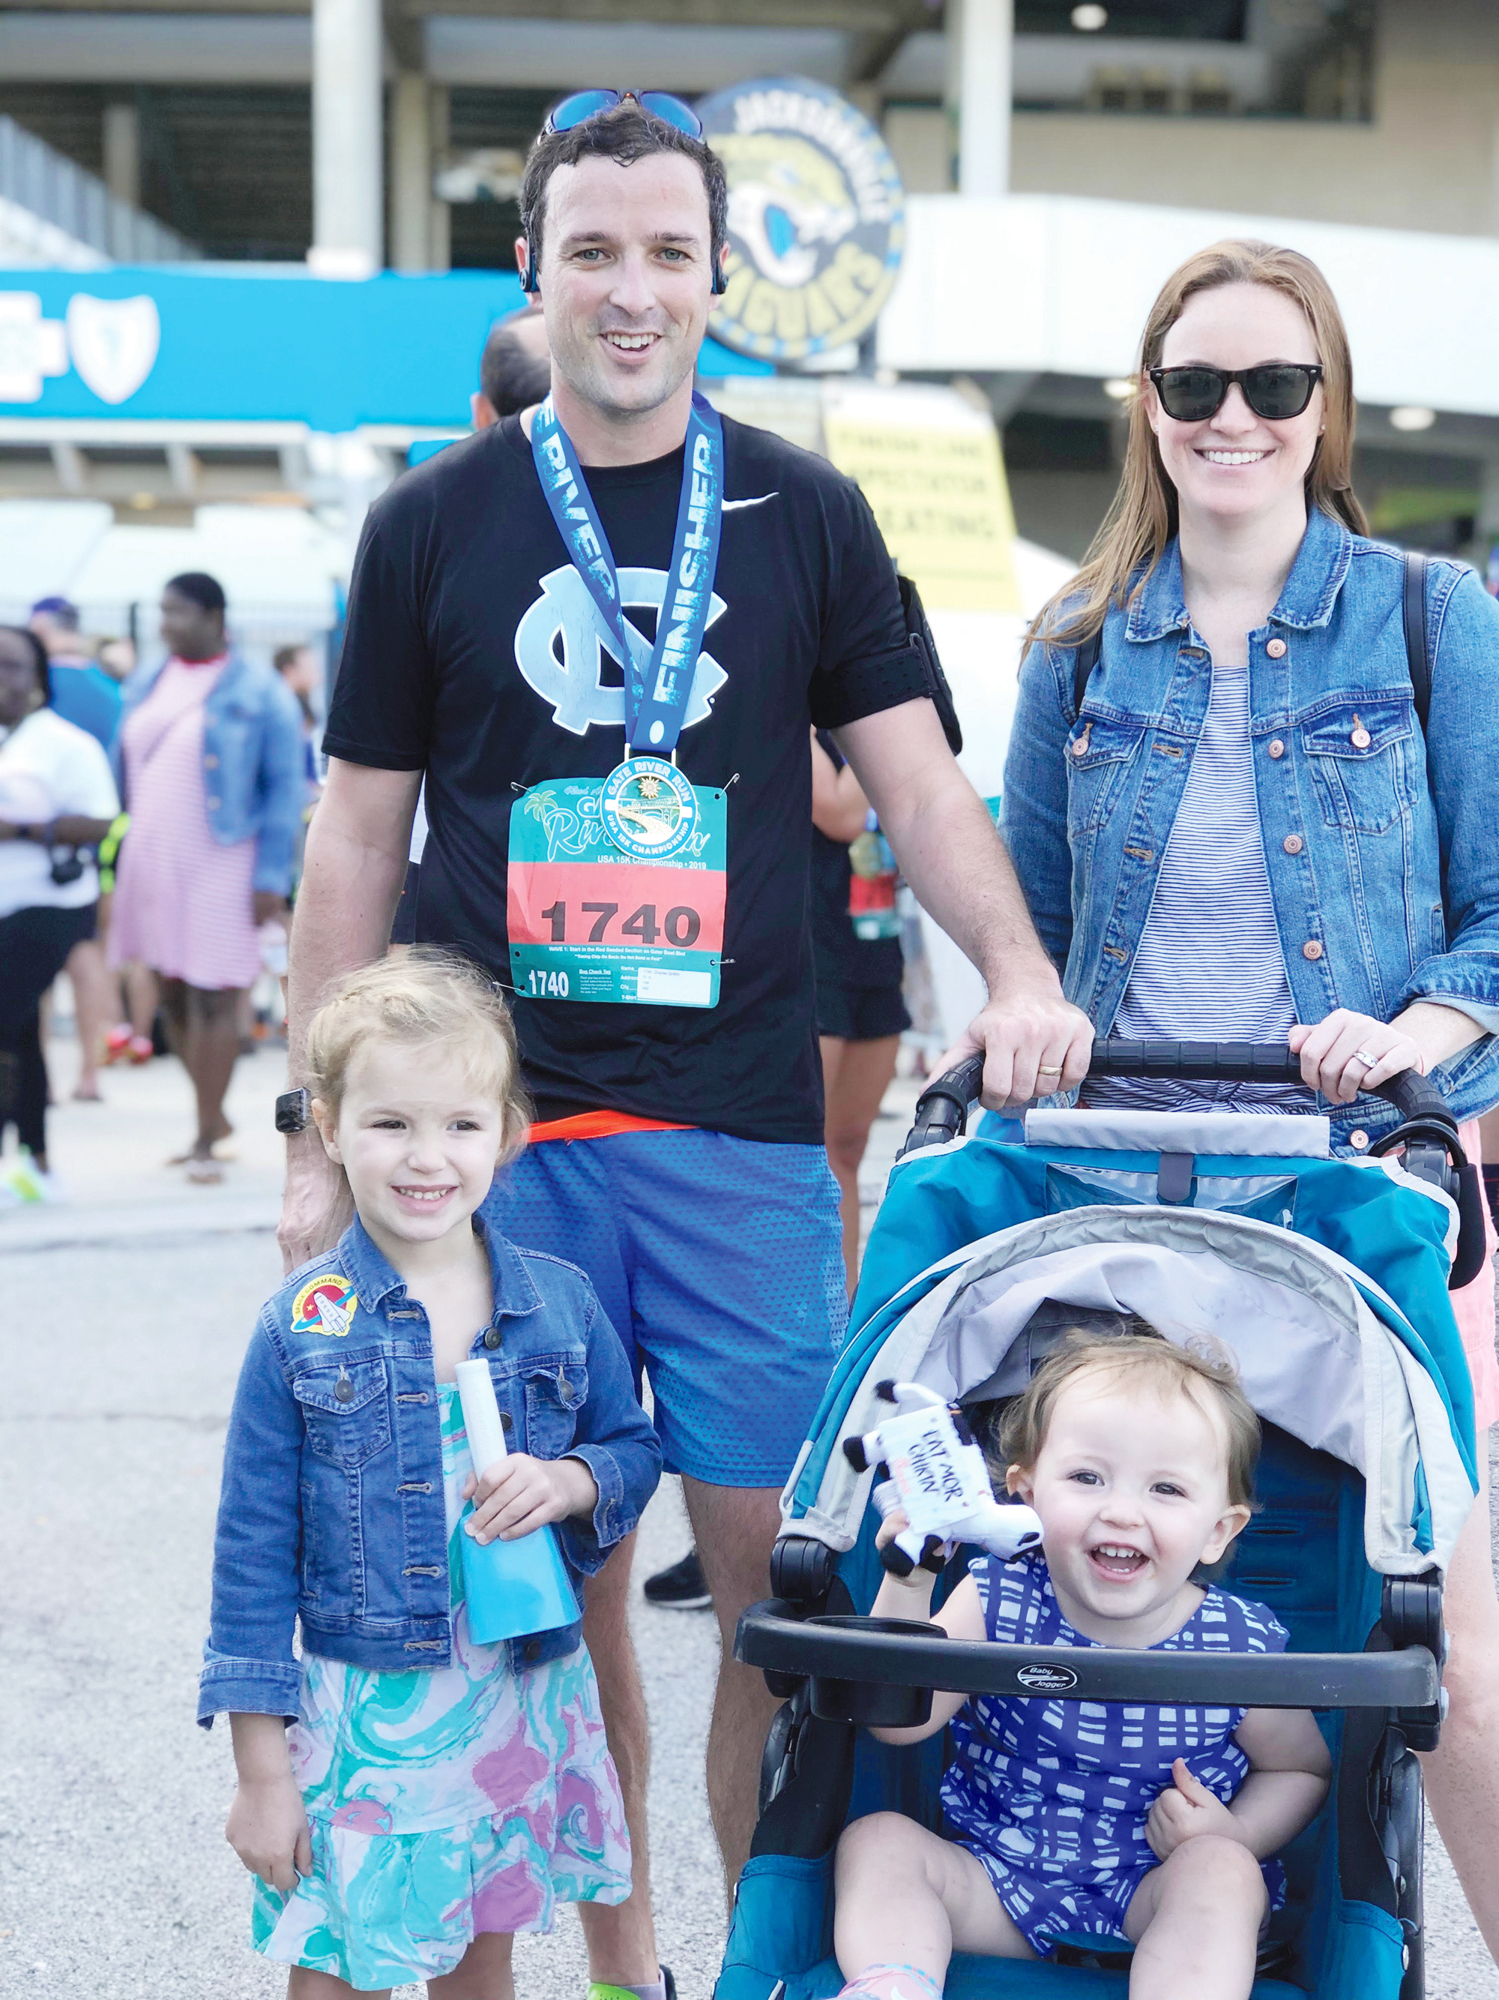 Attorney and avid runner Chuck Griffith with his wife, Lauren, and daughters Ginny, 4, and Maggie, 1.